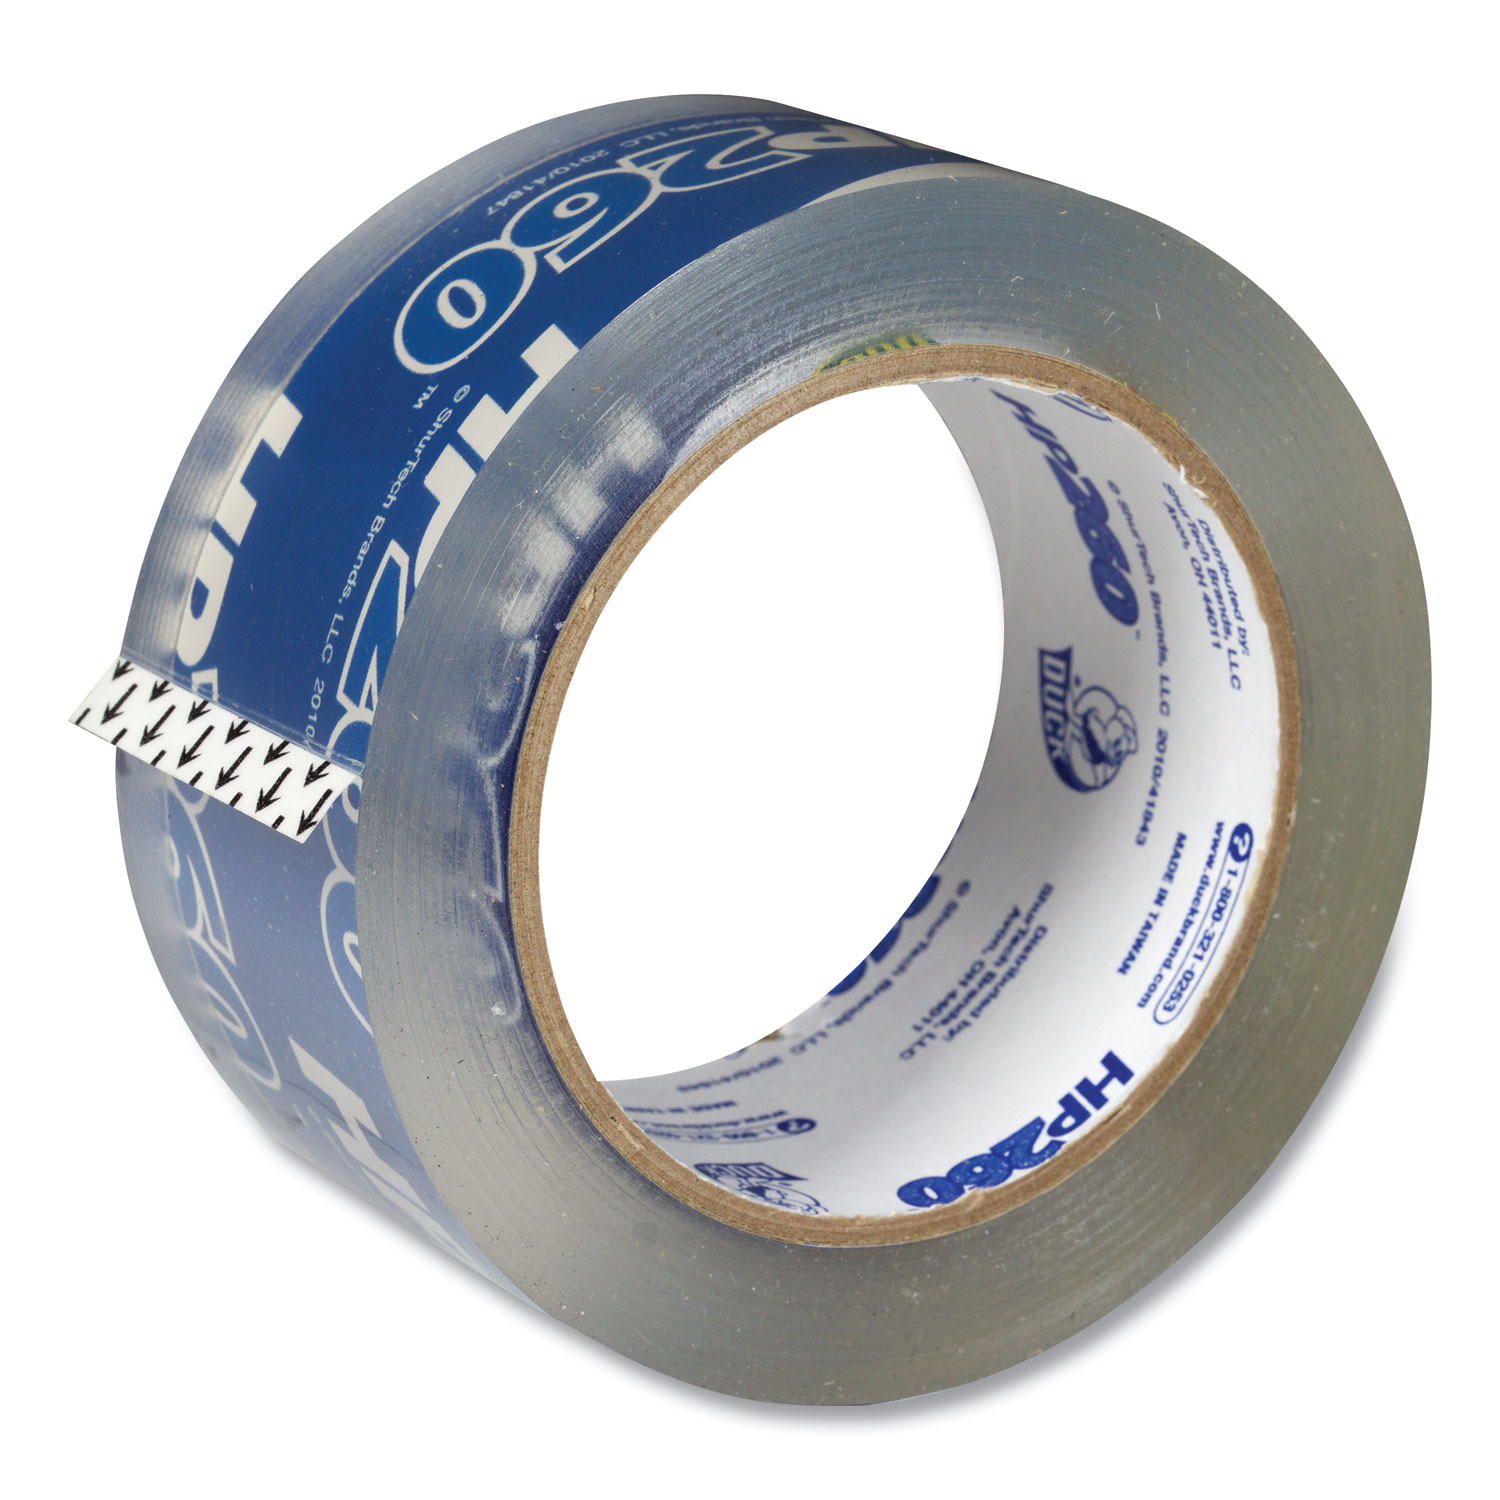  Duck 1288647 HP260 Packaging Tape, 3 Core, 1.88 x 60 yds, Clear, 36/Pack (DUC1288647) 